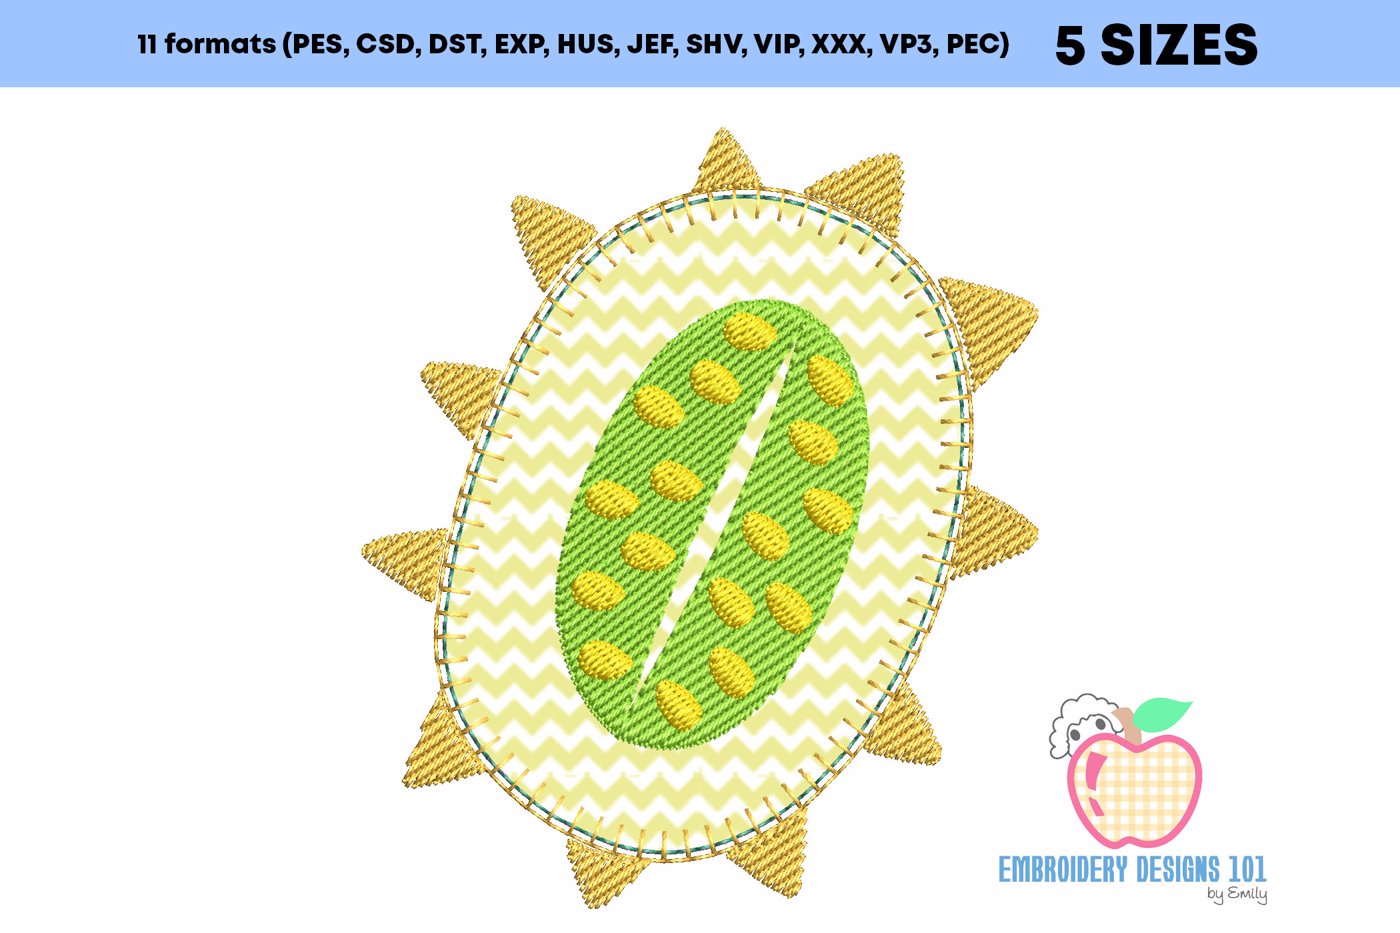 Kiwano With A Seed Embroidery Design